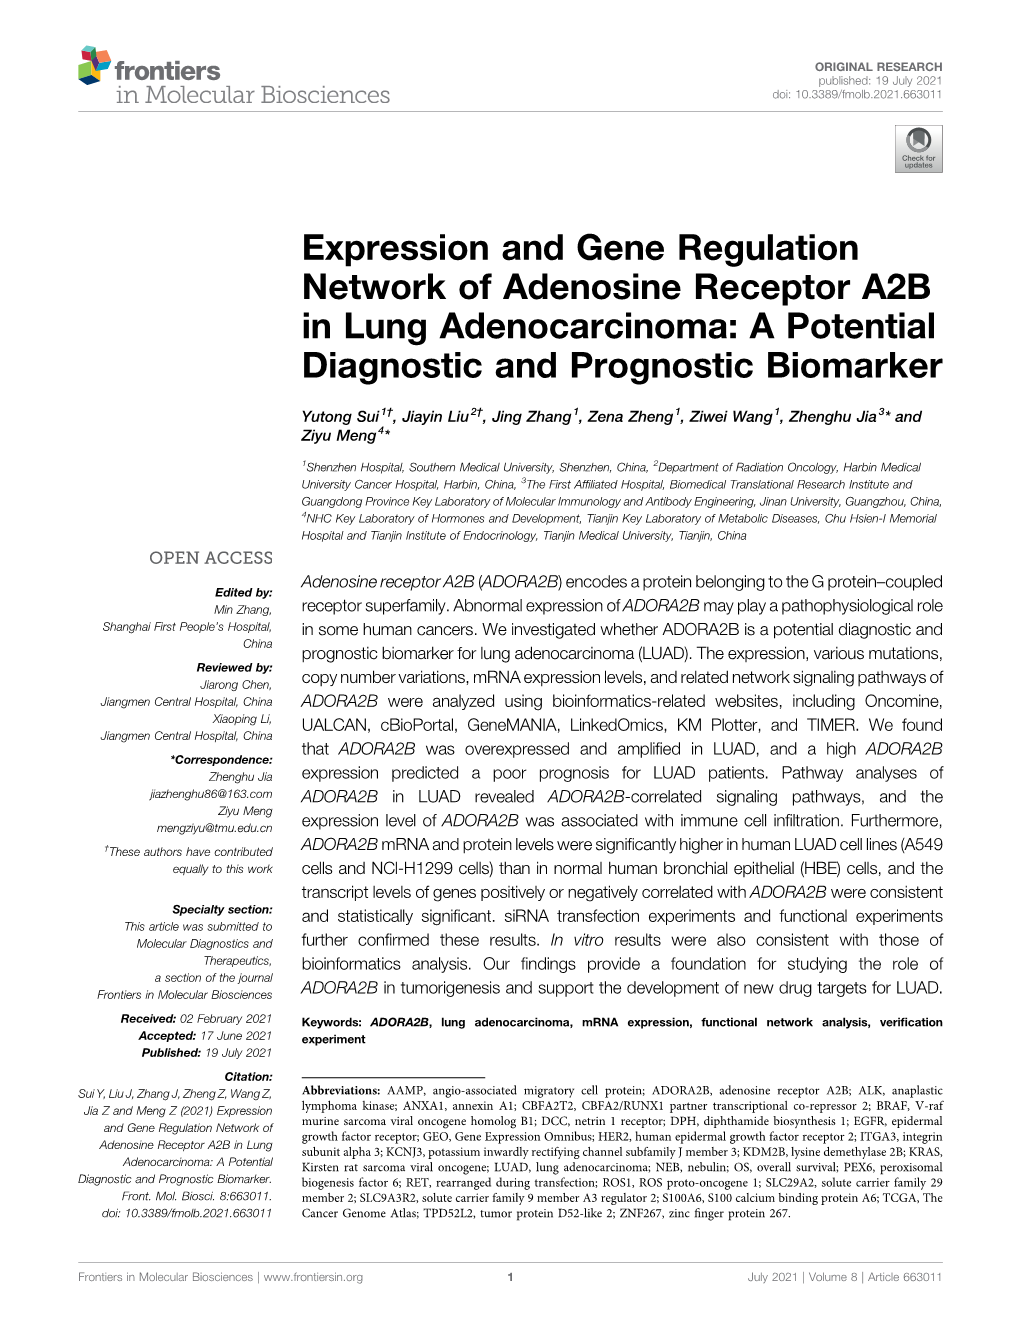 Expression and Gene Regulation Network of Adenosine Receptor A2B in Lung Adenocarcinoma: a Potential Diagnostic and Prognostic Biomarker